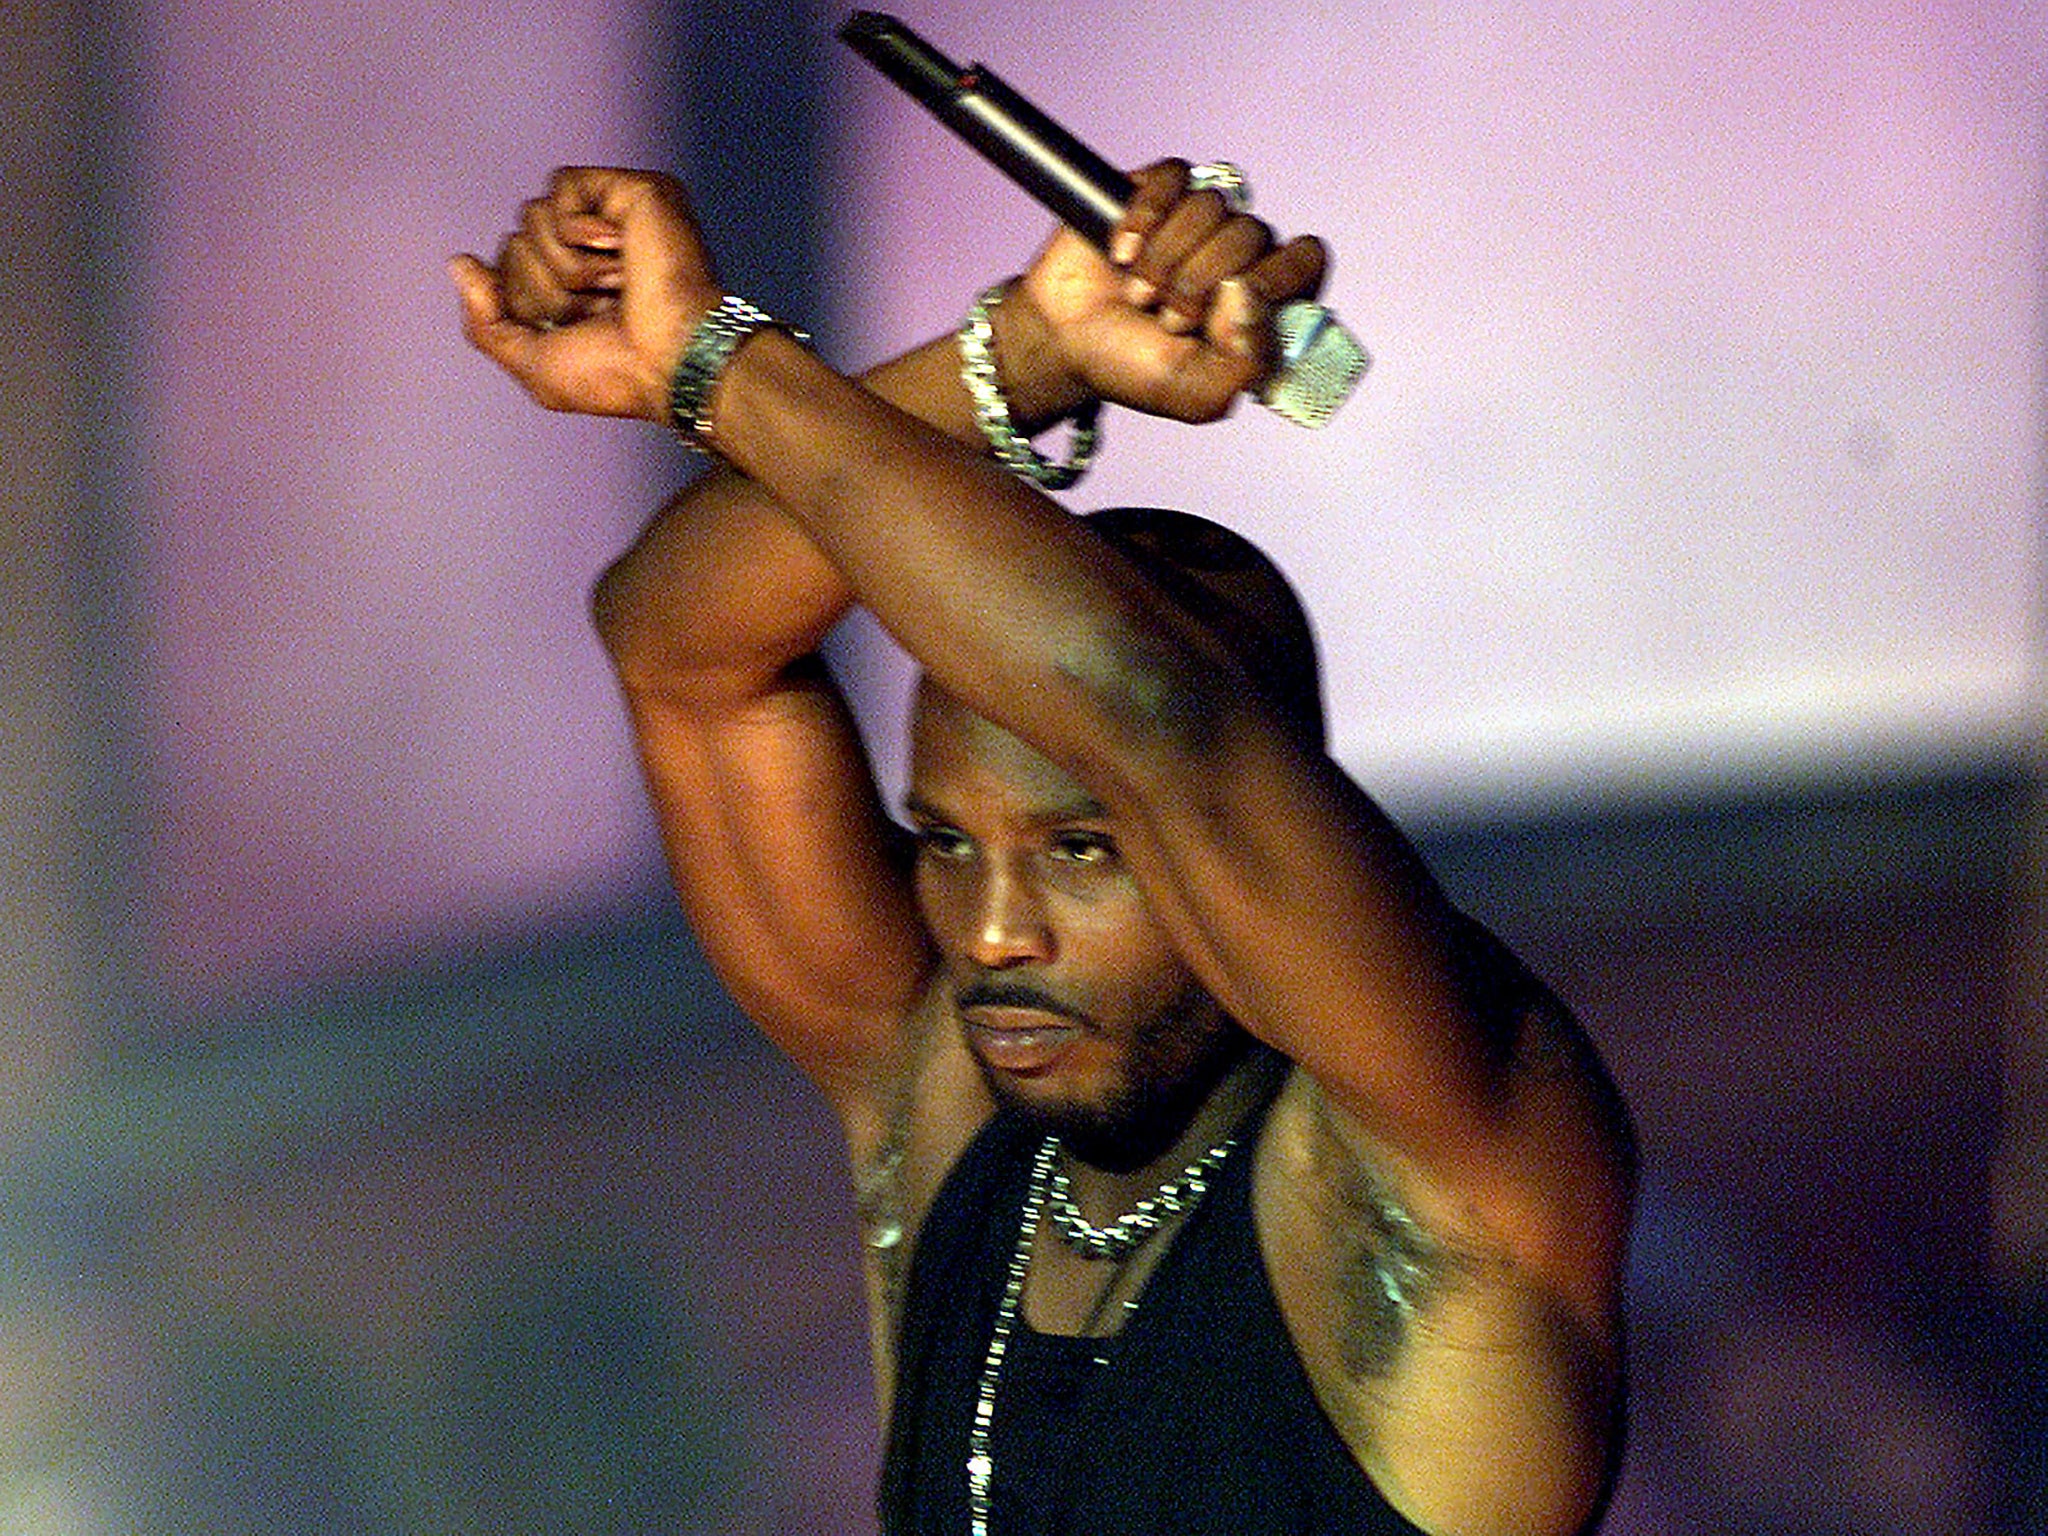 <p>A man who knew he was a work in progress: DMX performs at The Source Awards in 2001</p>